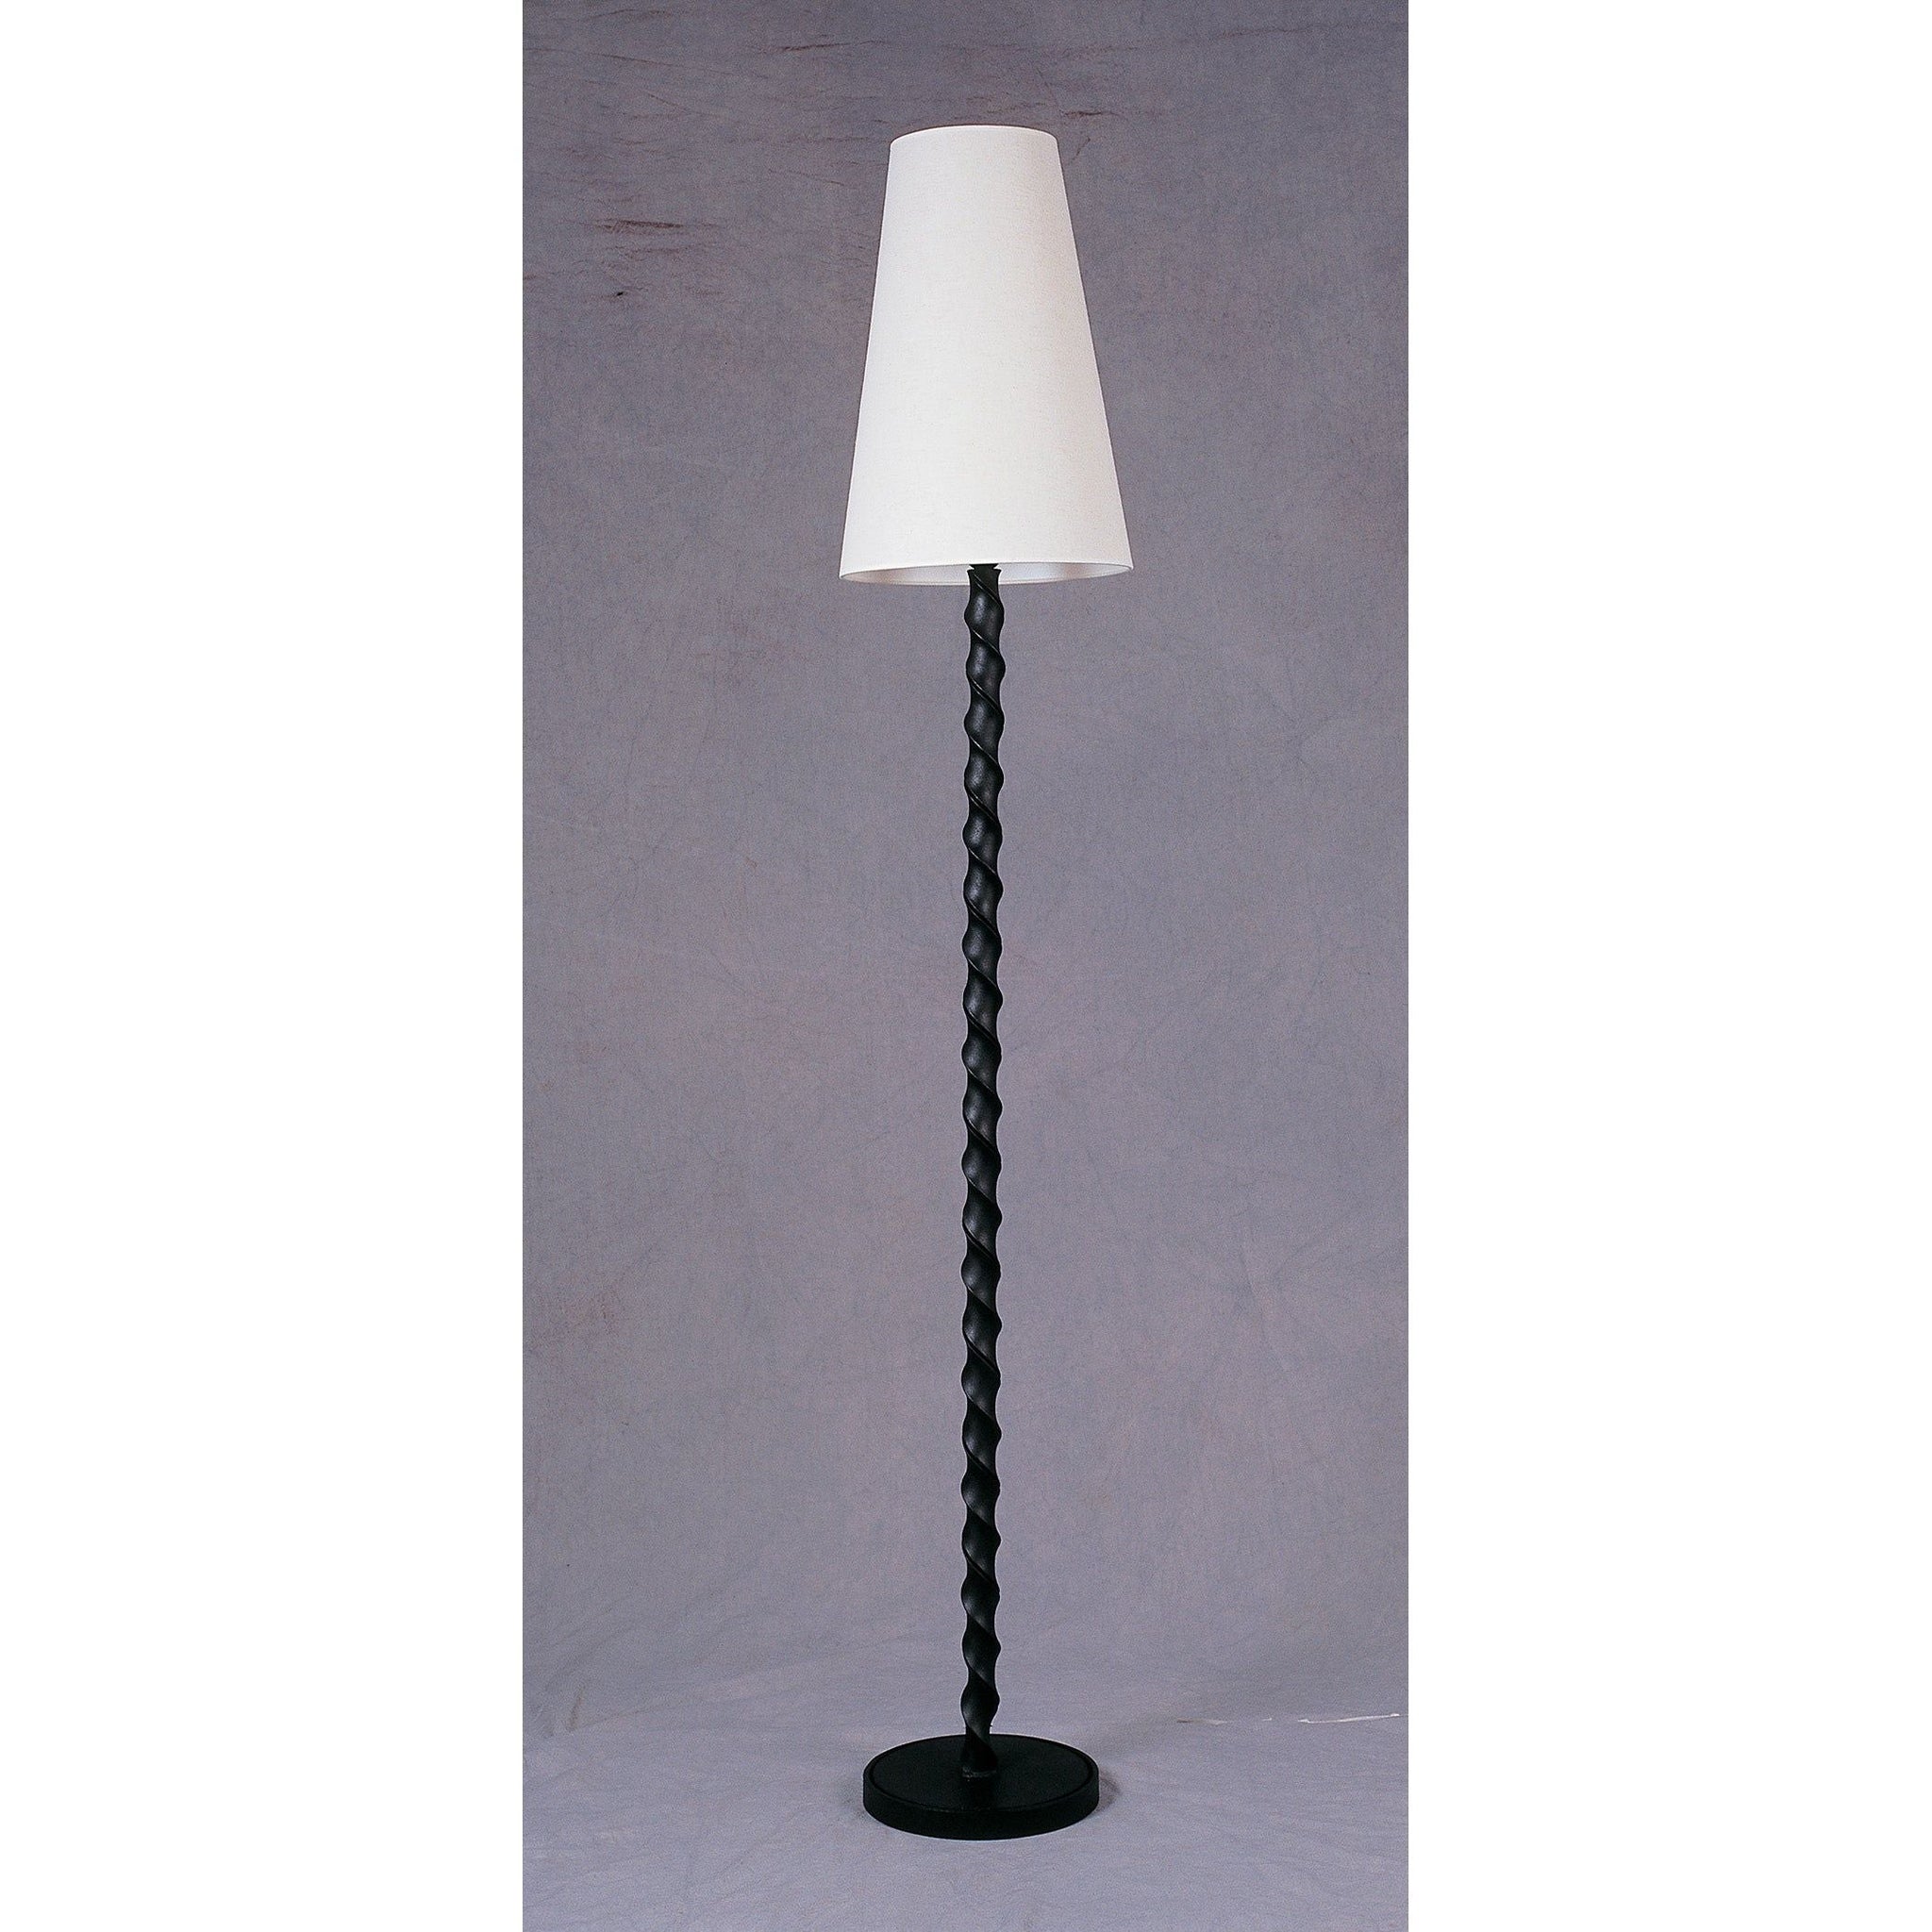 European Crafted 1-Light Table Lamp